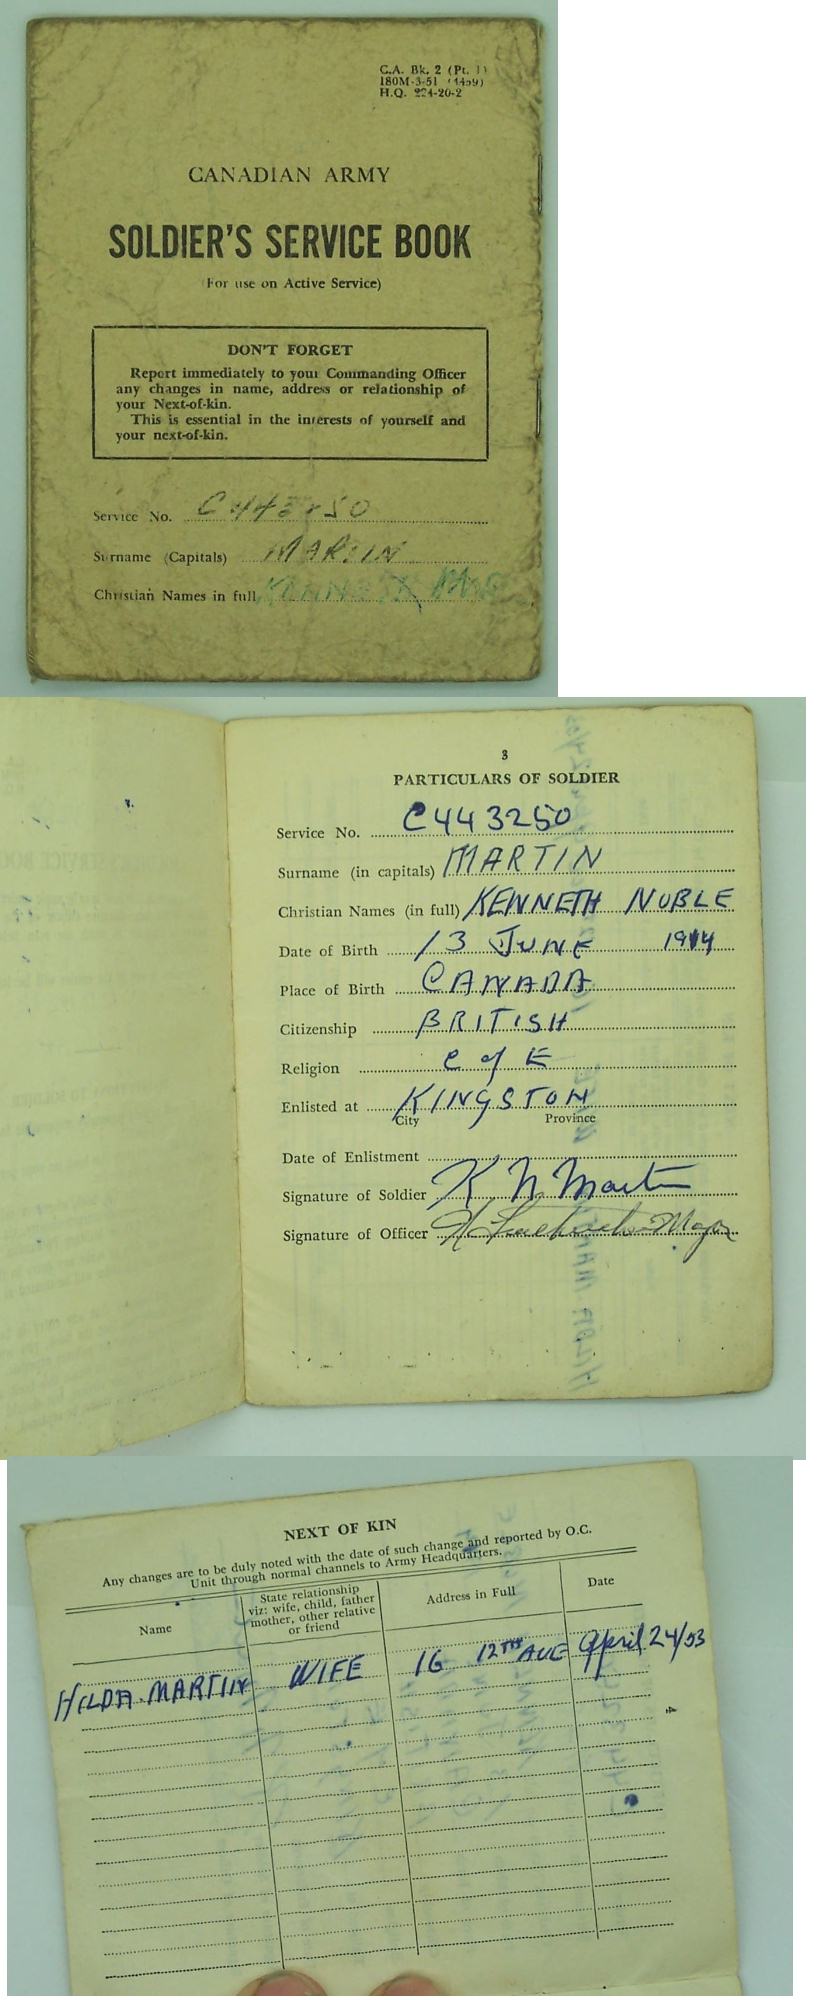 Canadian Army Soldier's Service book